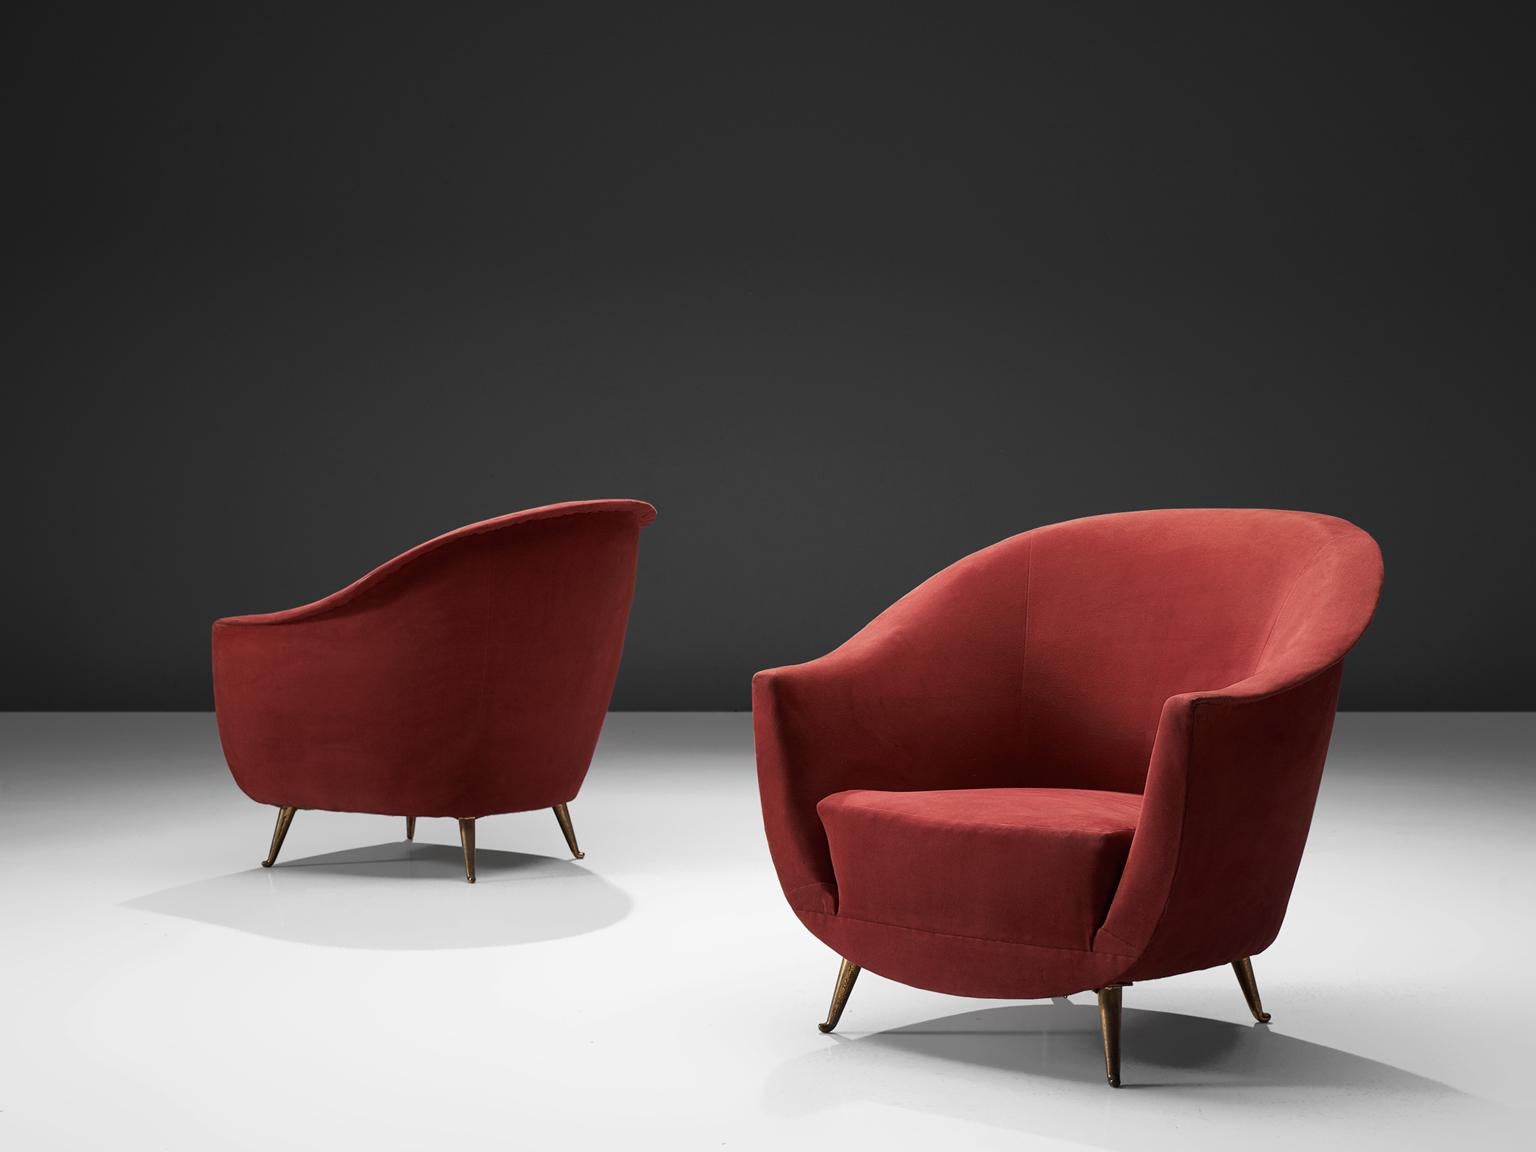 Lounge chairs, red fabric, wood, Italy, 1950s.

These red chairs in the style of Guglielmo Veronesi feature a high back with high armrests that are almost as high as the back. As a result, this chair works as a type of shell that embraces the